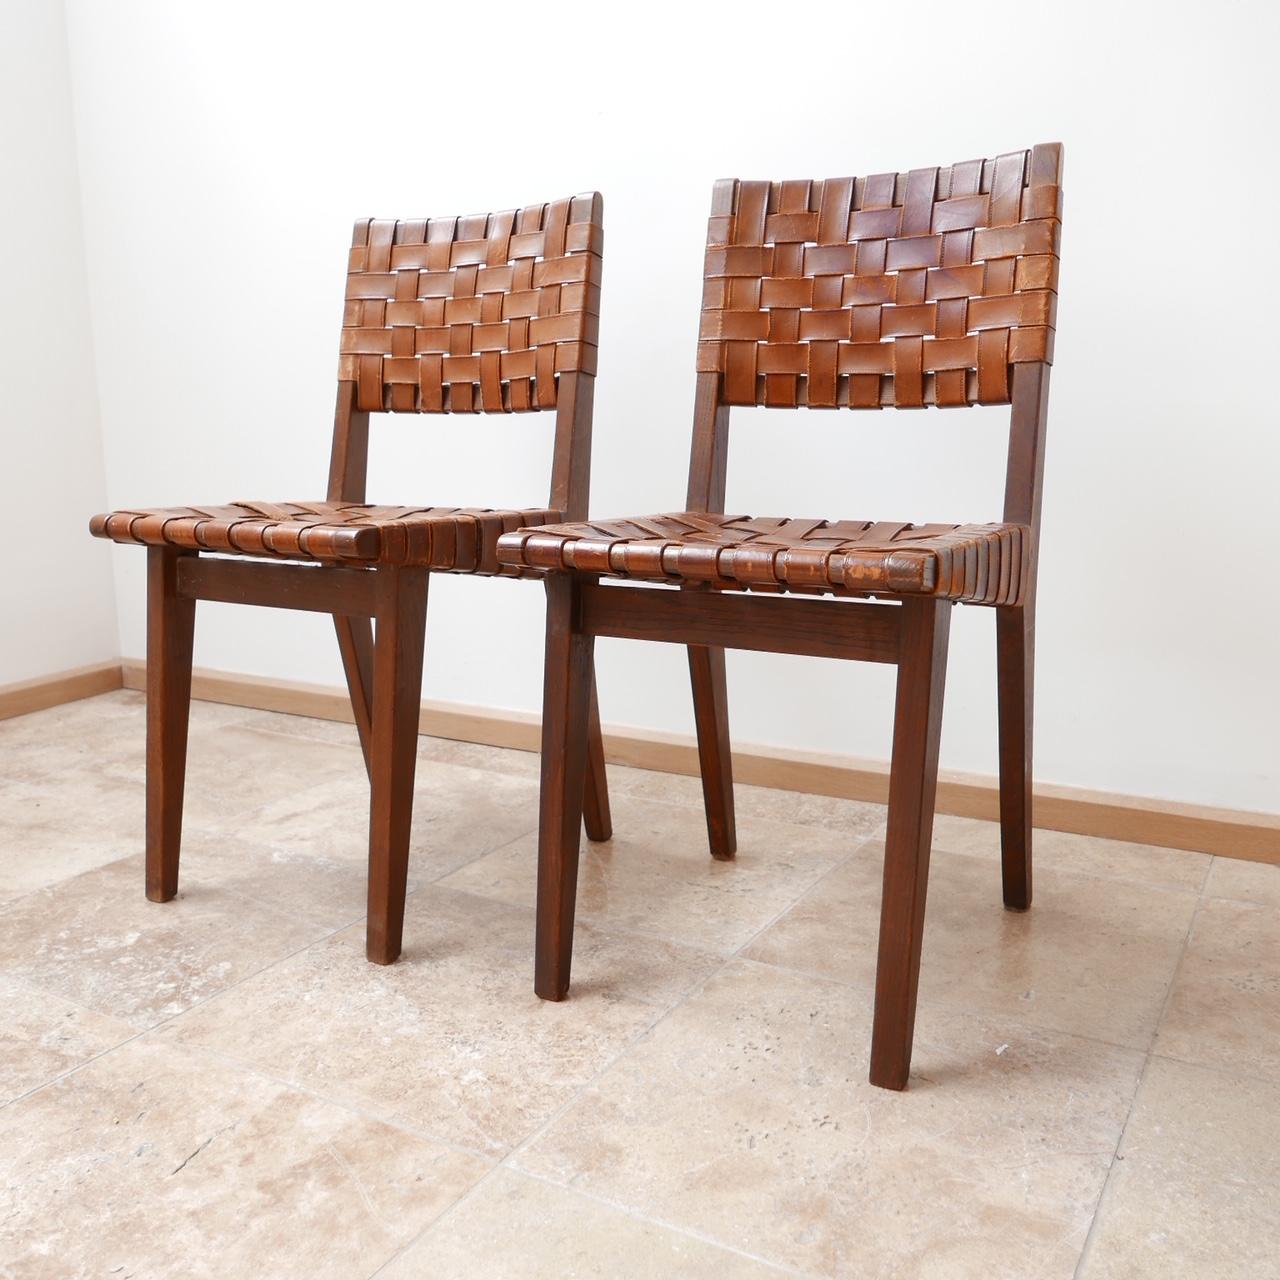 Woven leather side chairs.

Attributed to Jens Risom for Knoll, circa 1940s, likely the model 666.

Midcentury.

Some wear to the leather. One strap has broken and we are looking into repairs at the moment but priced accordingly.

Price for